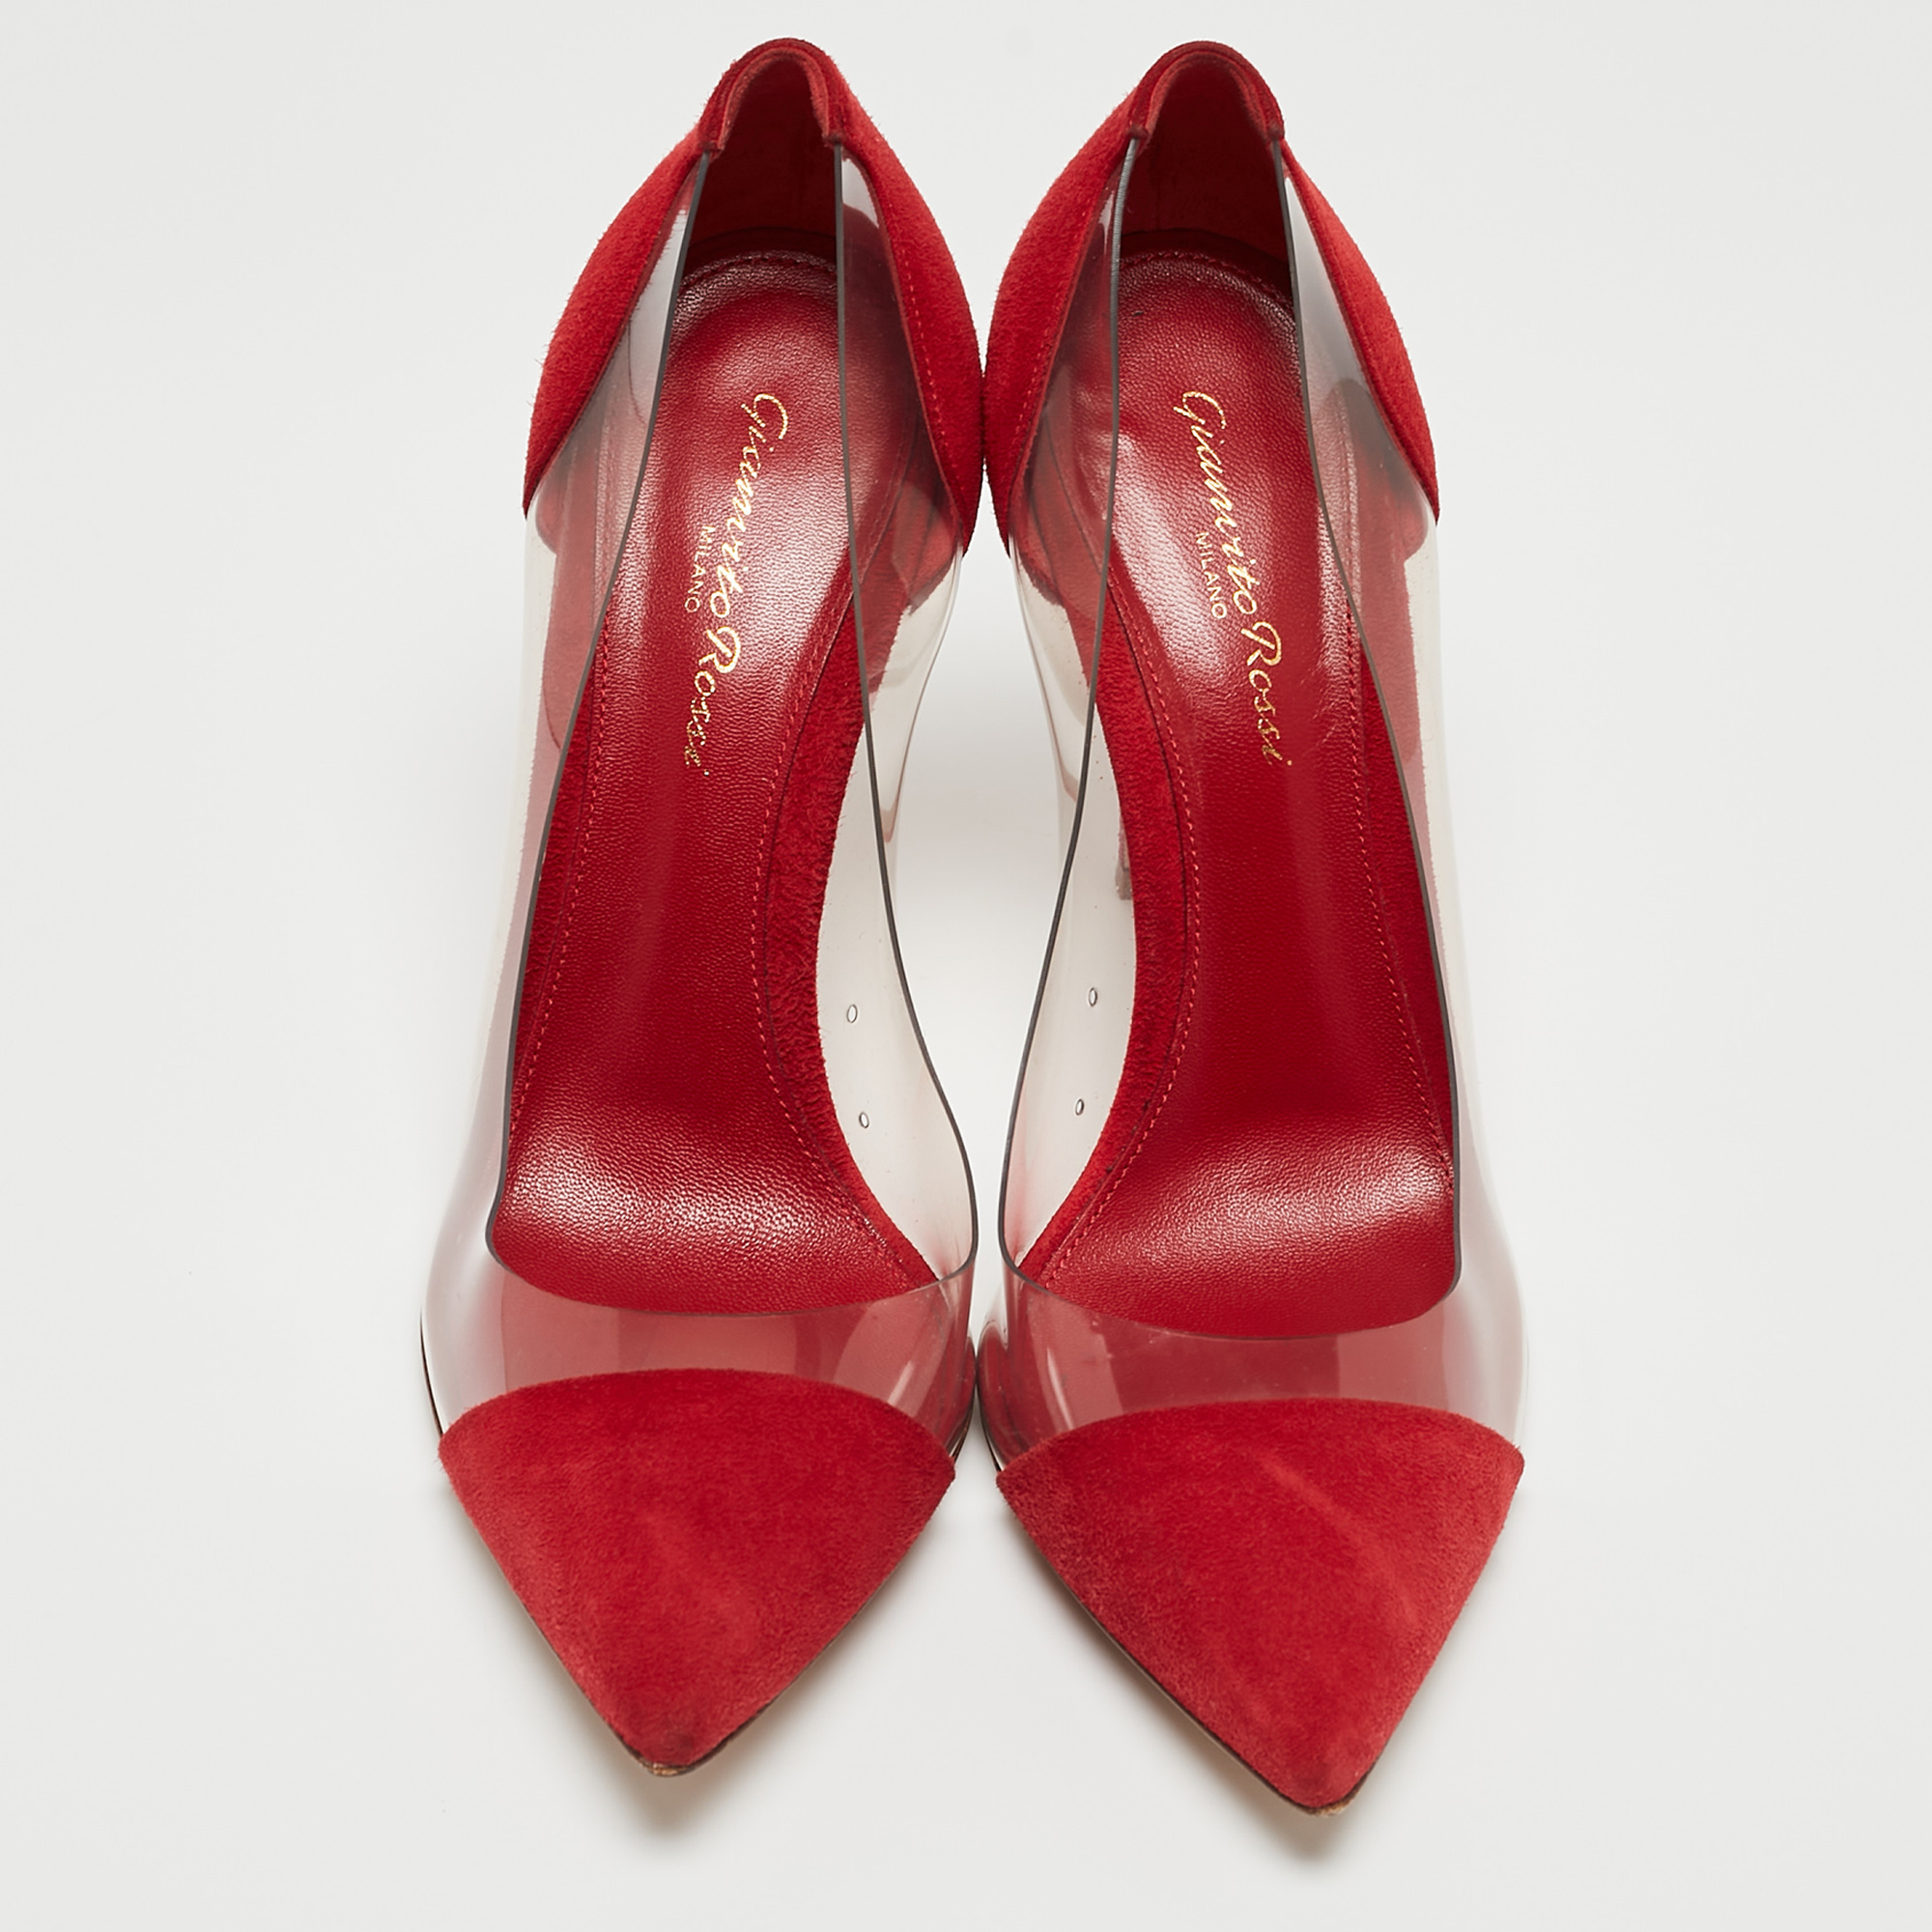 Gianvito Rossi Red Suede And PVC Plexi Pumps Size 38.5